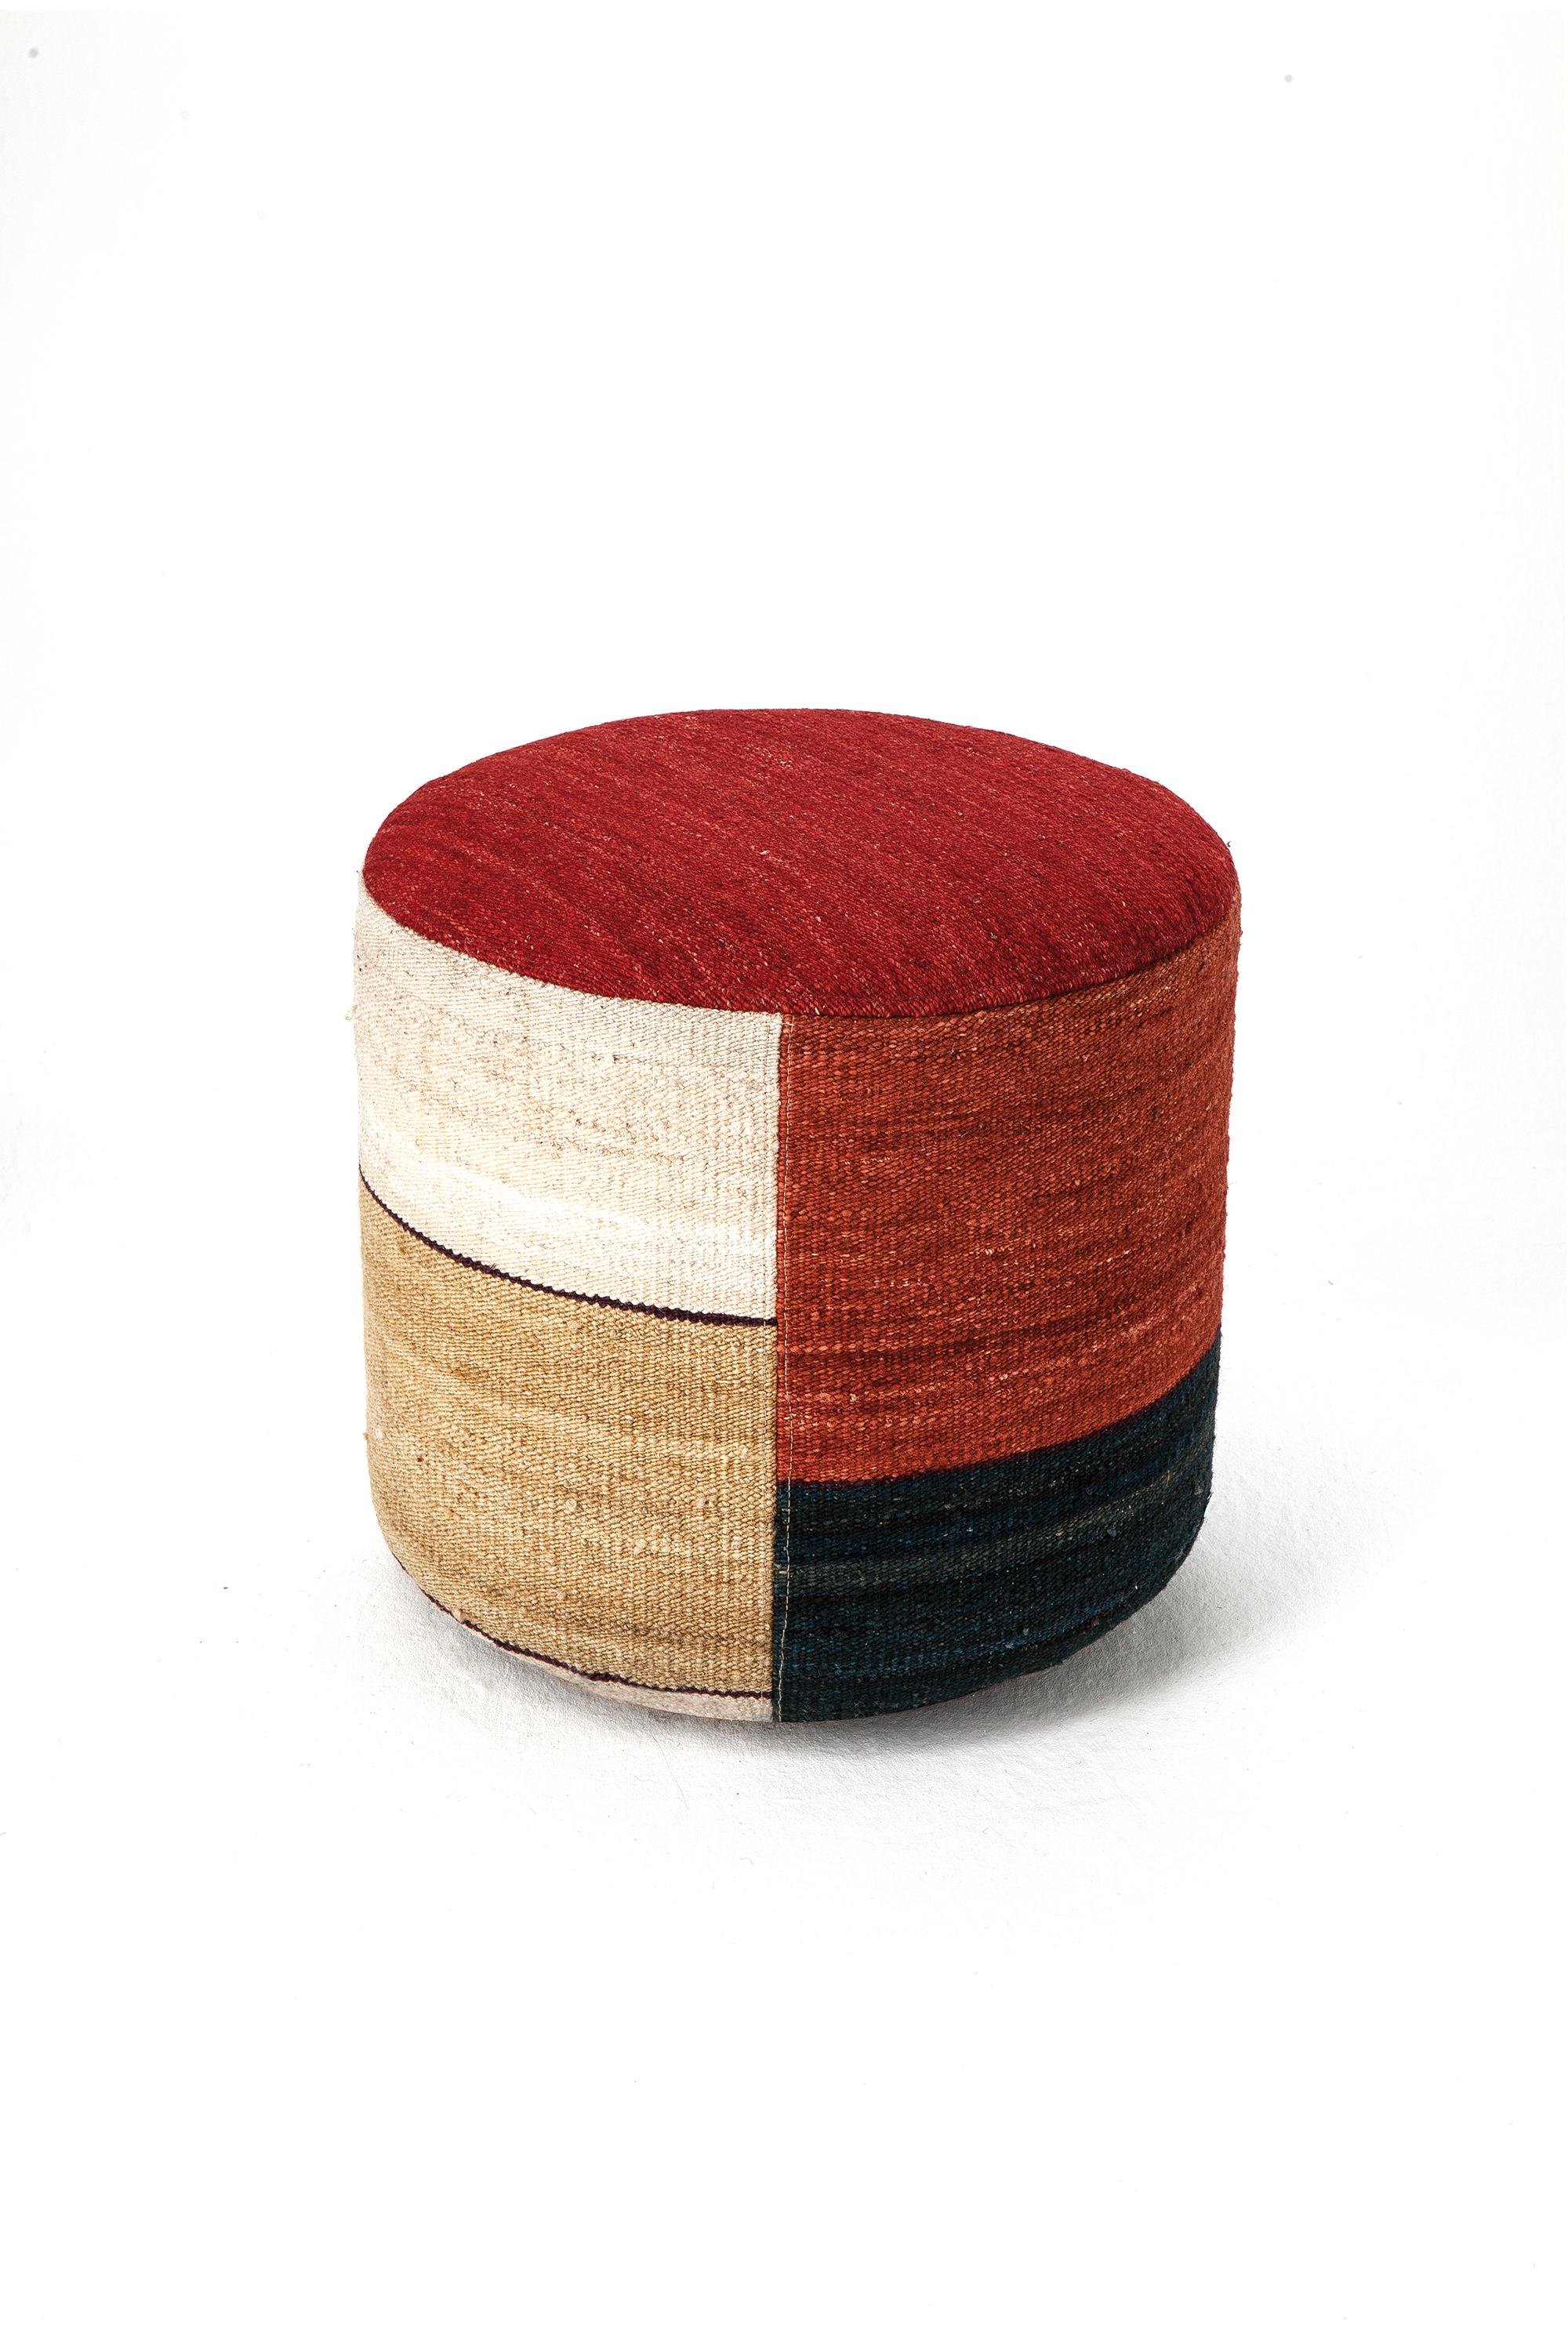 'Kilim 1' Pouf by Nani Marquina and Marcos Catalán for Nanimarquina For Sale 8